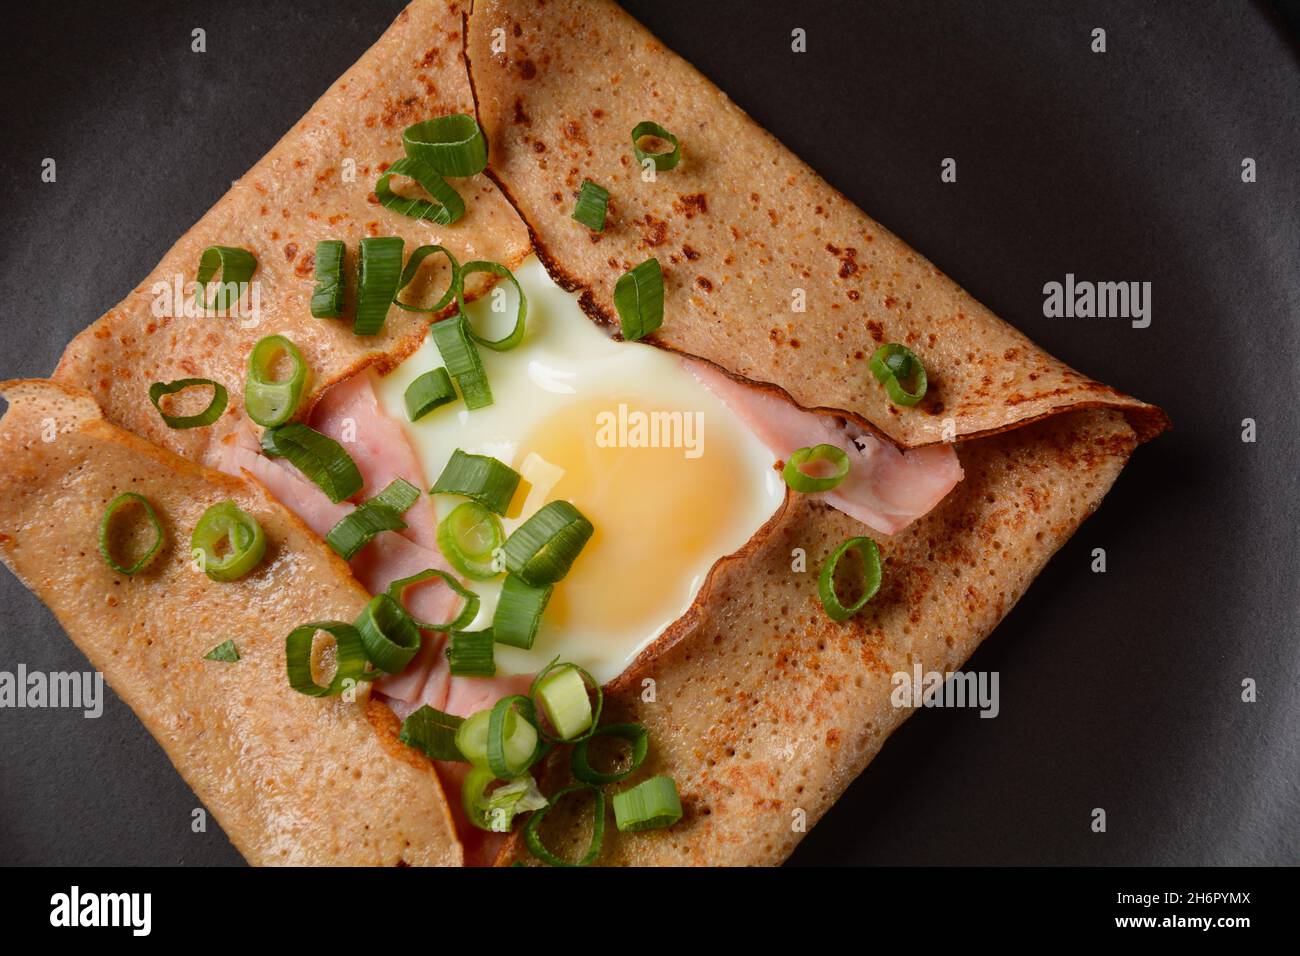 Breton galette, galette sarrasin, buckwheat crepe, with fried egg, cheese, ham. French Brittany cuisine. Stock Photo